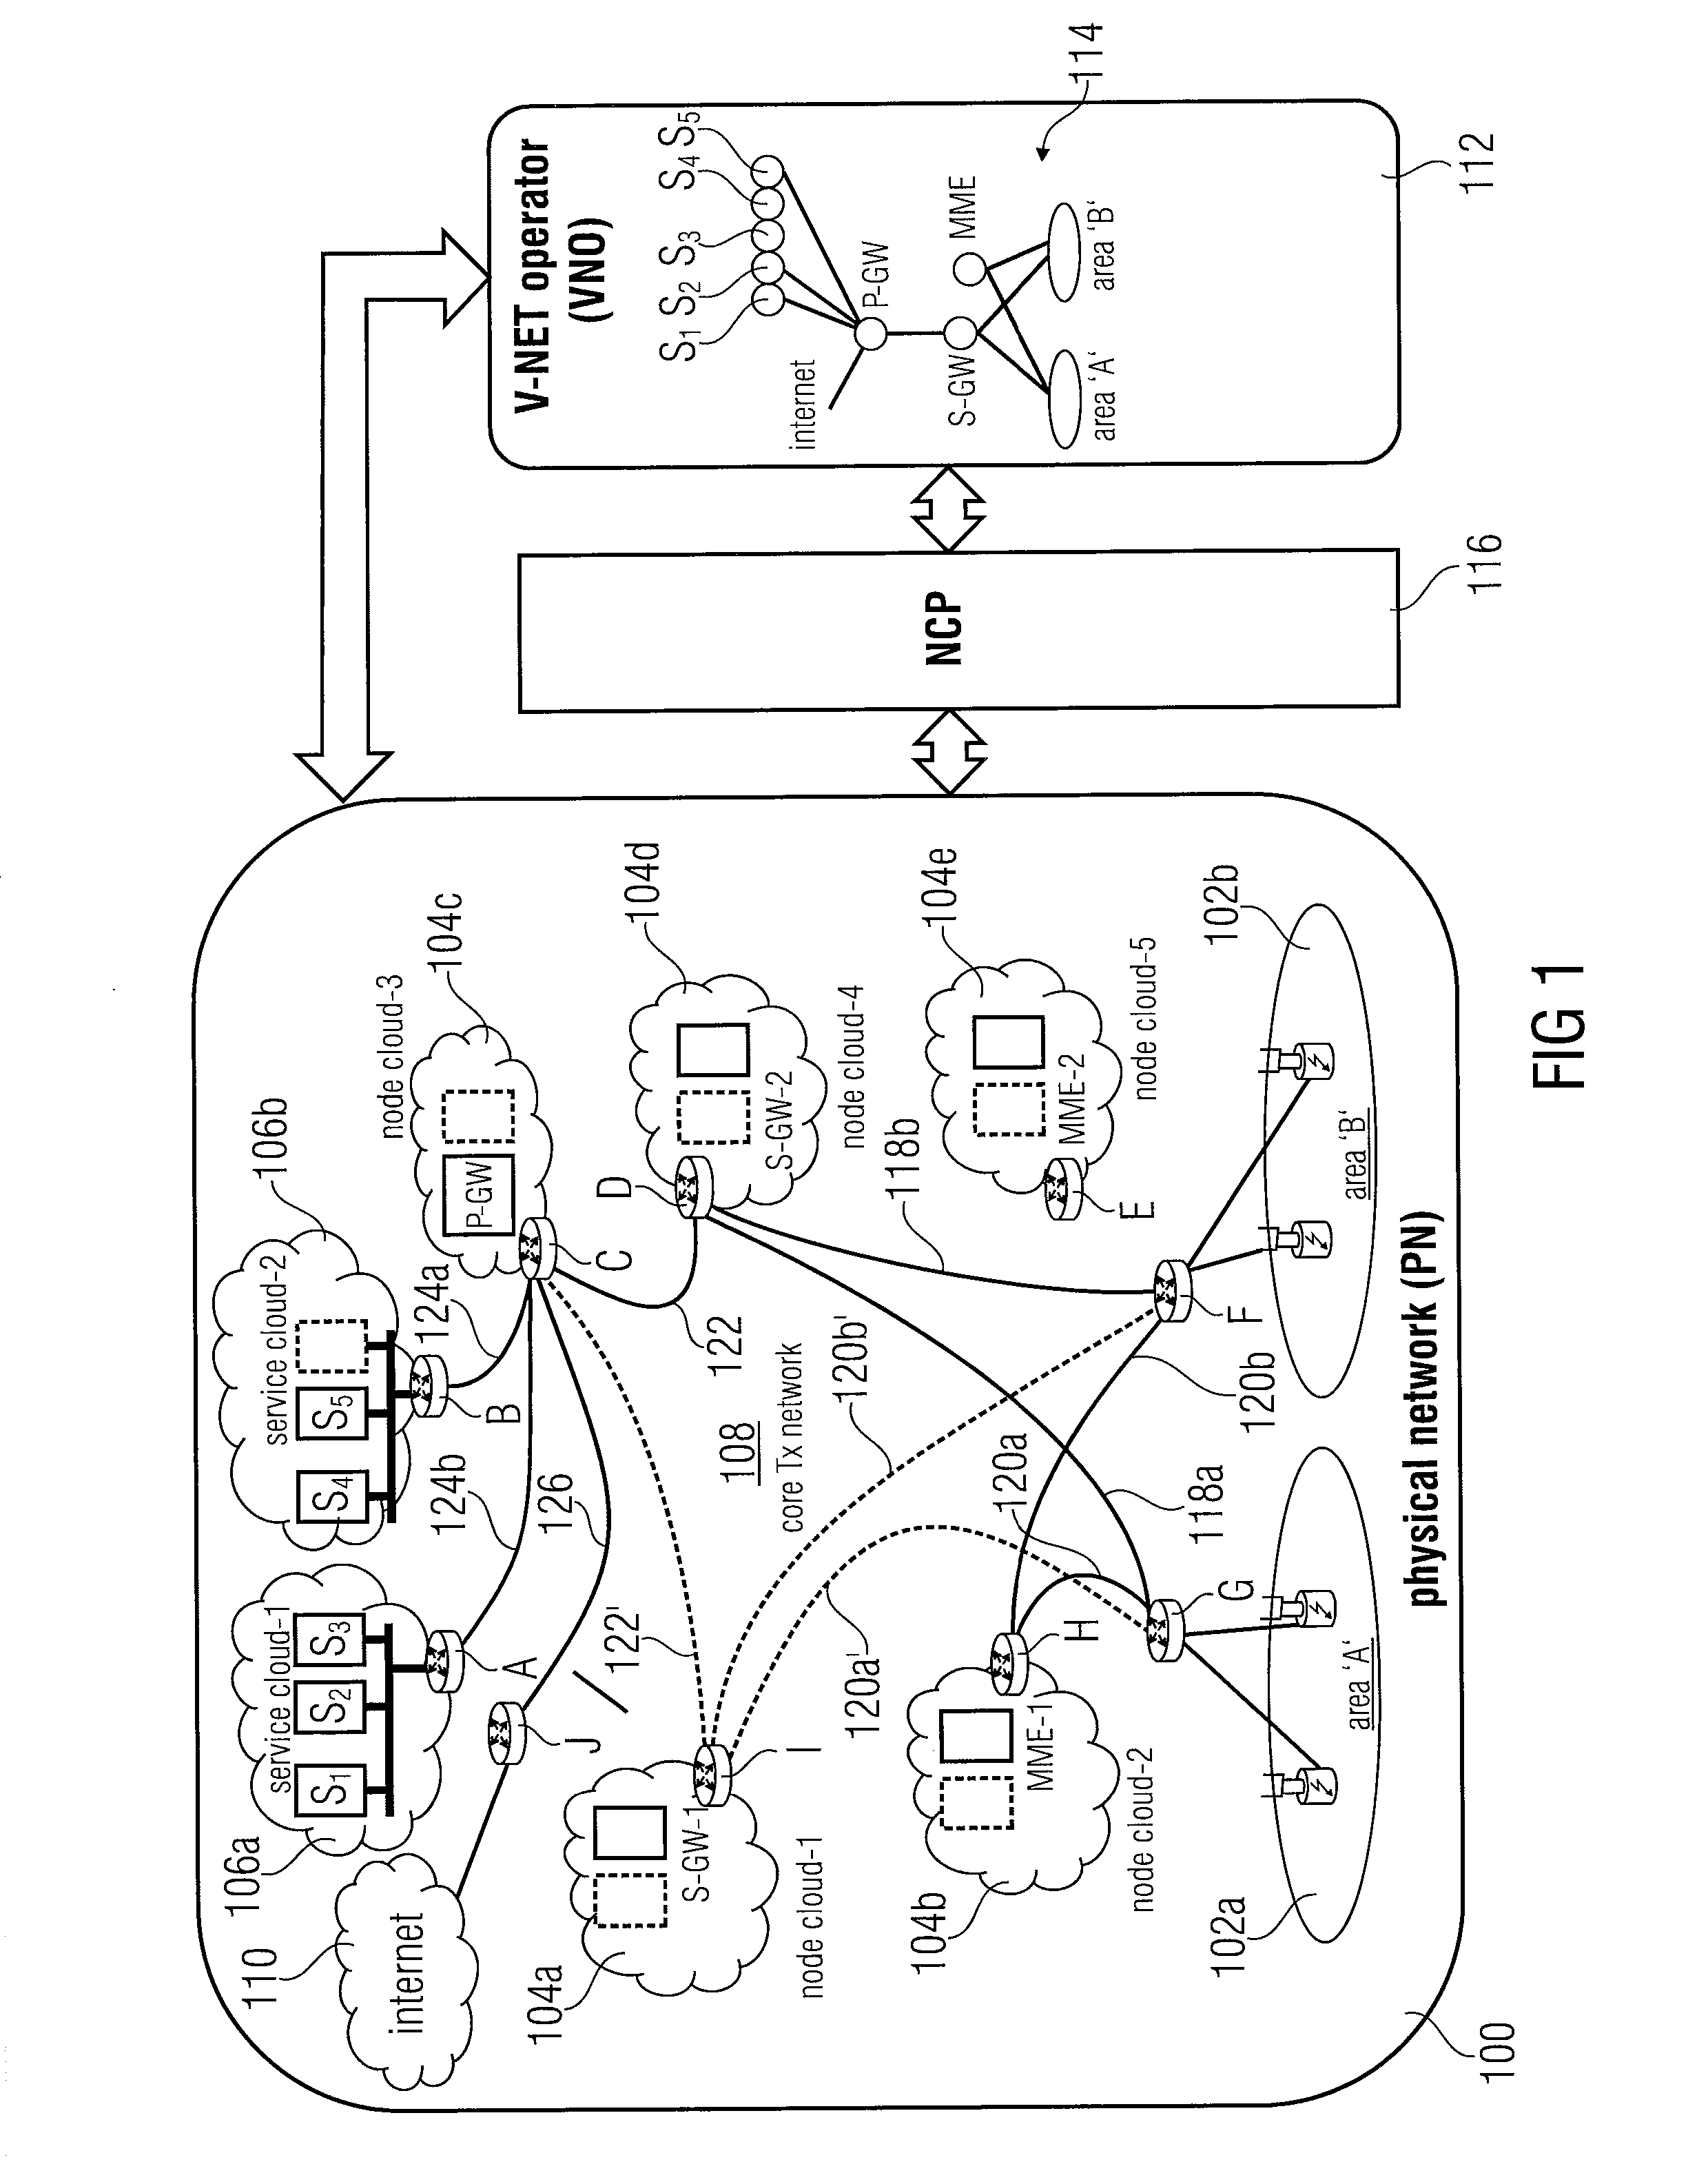 Method for mapping a network topology request to a physical network and communication system